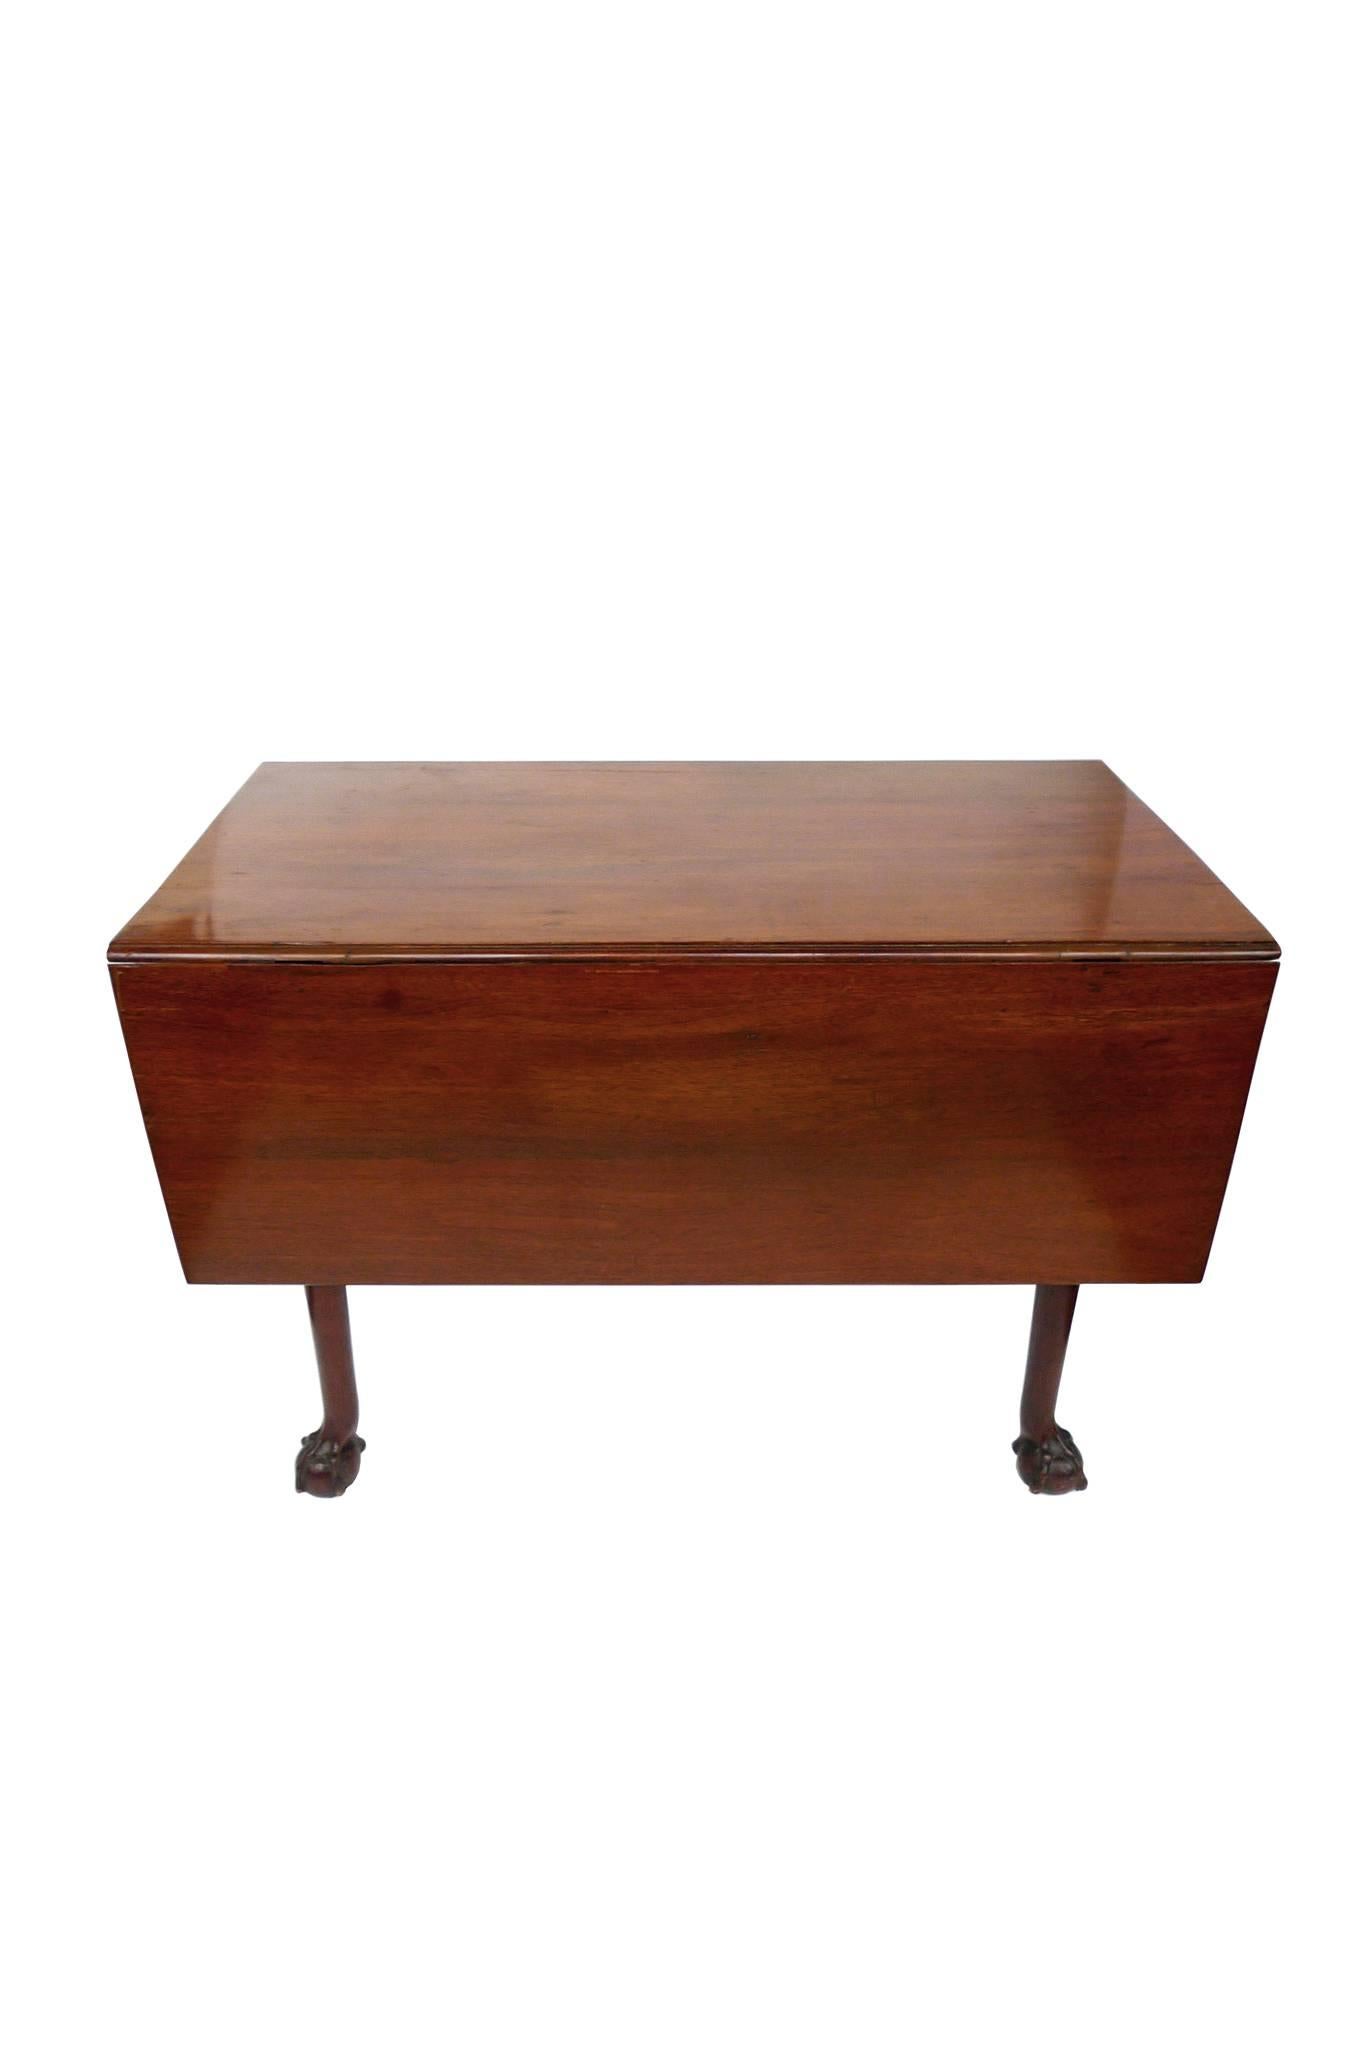 This English Chippendale drop-leaf table is mahogany and was created, circa 1760-1780. The mahogany is a rich honey brown and well-aged. There are two drop leaves, each measuring 15.5 inches. With both leaves unfolded, the table's depth extends to